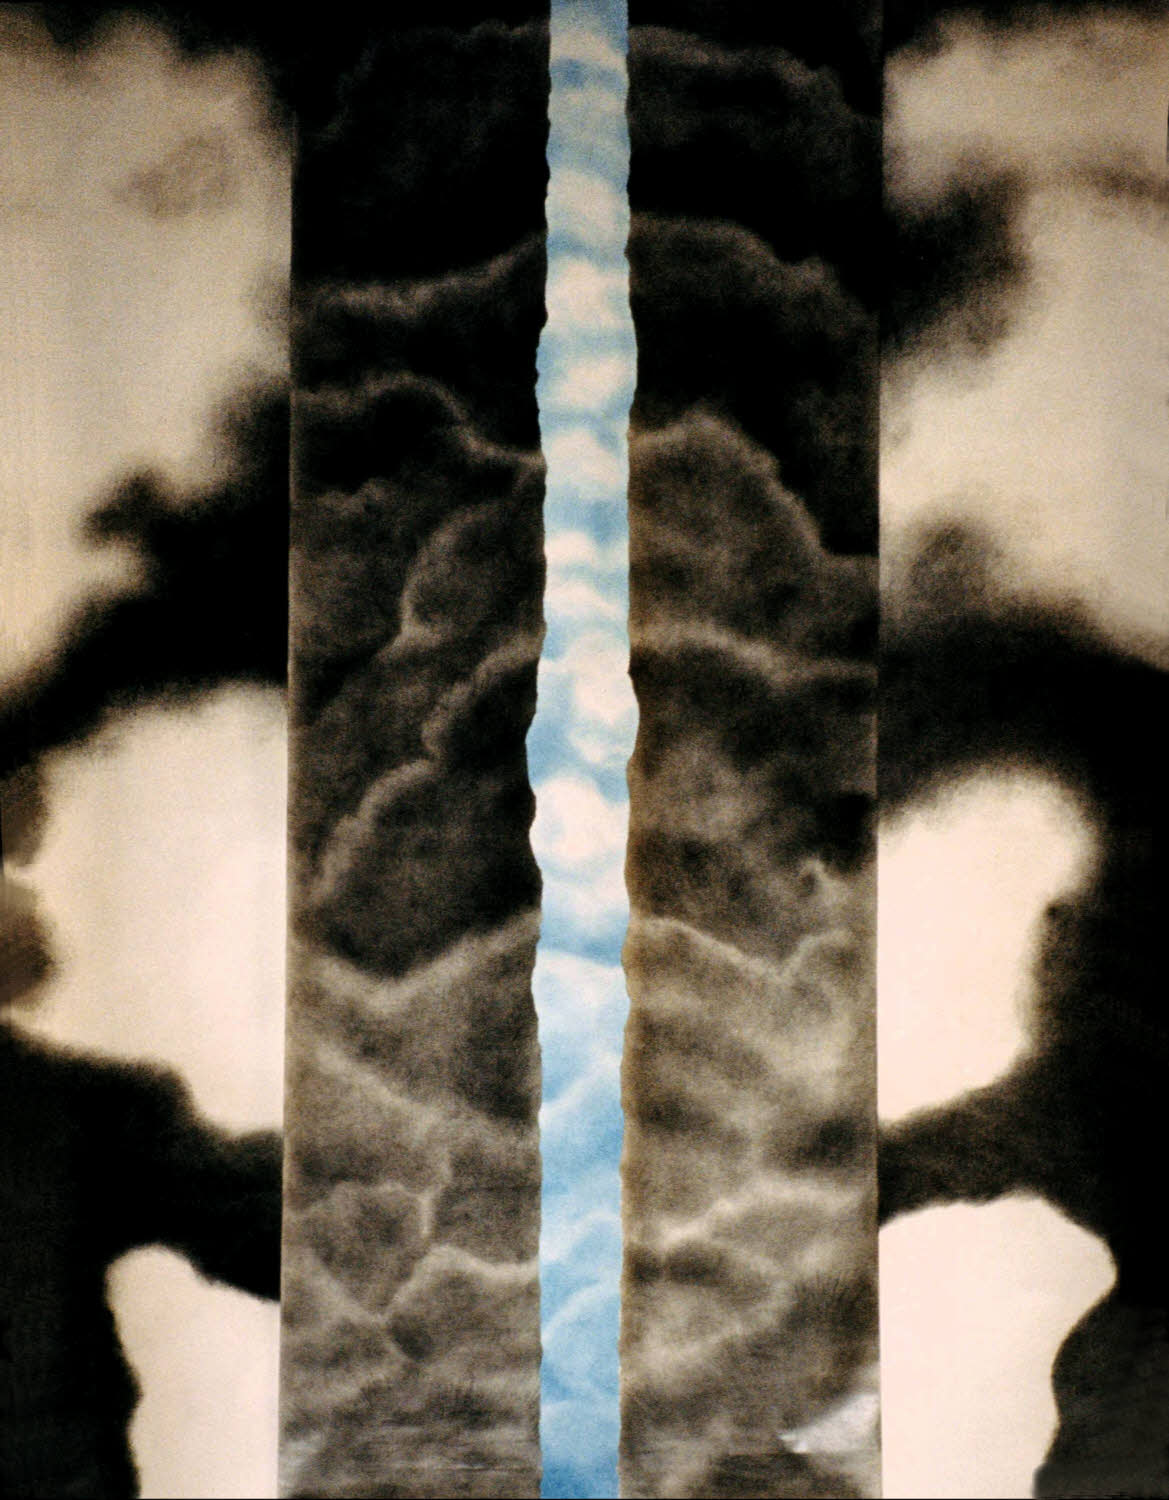 8 Expectation from Hope in Blue, 1996, graphite, pastel on texture paper, 177x118 inches